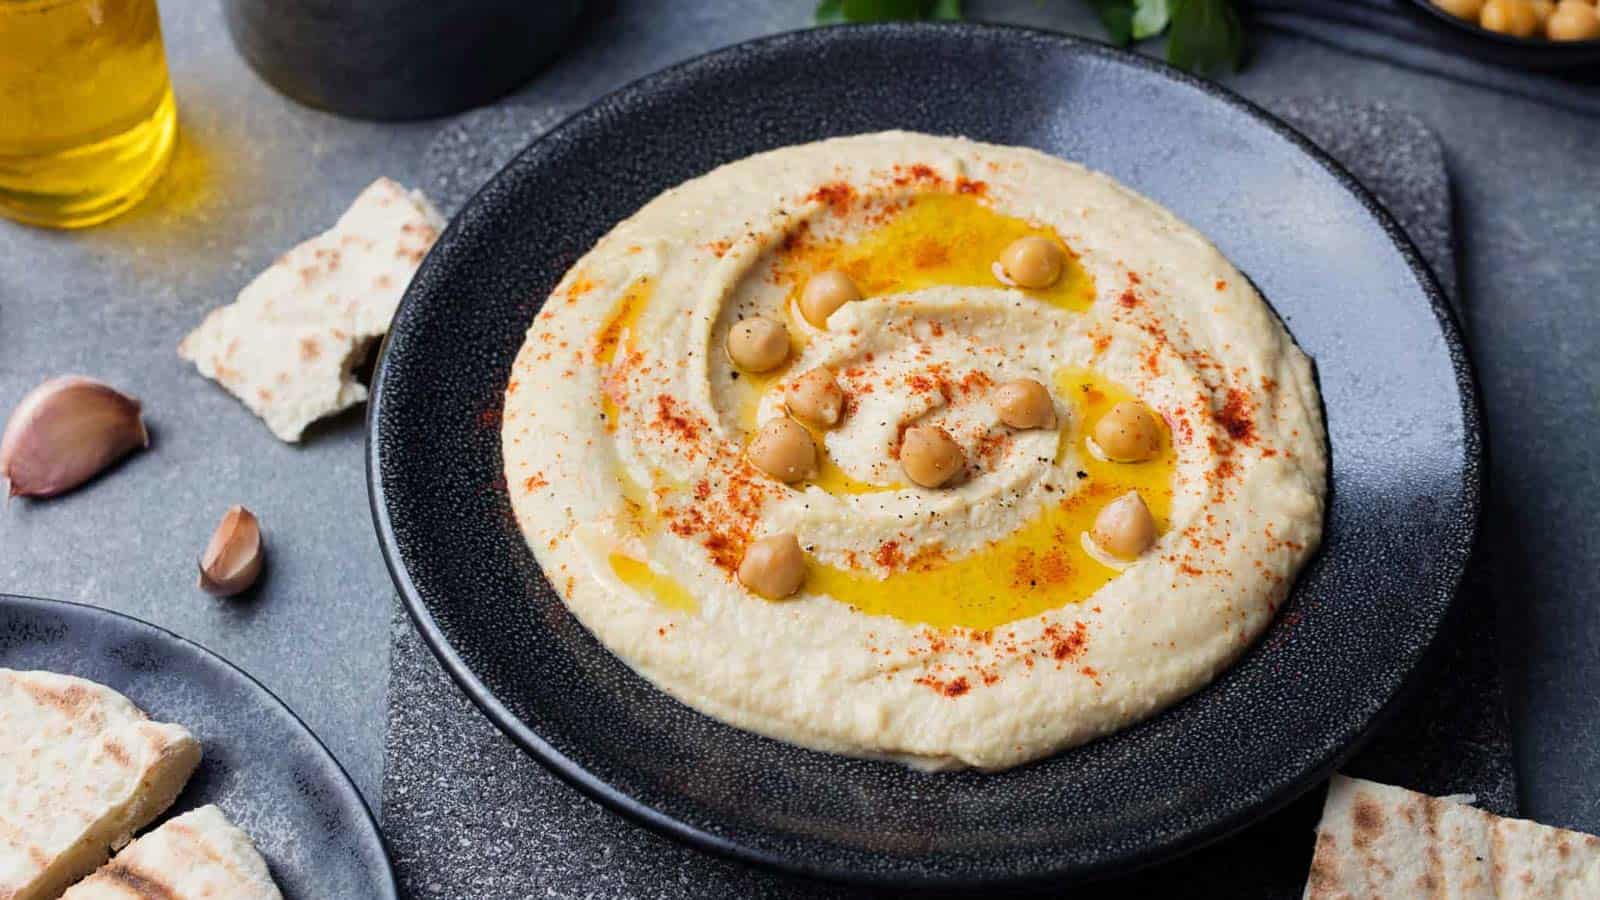 Hummus in a black bowl garnished with whole chickpeas, olive oil, and paprika.